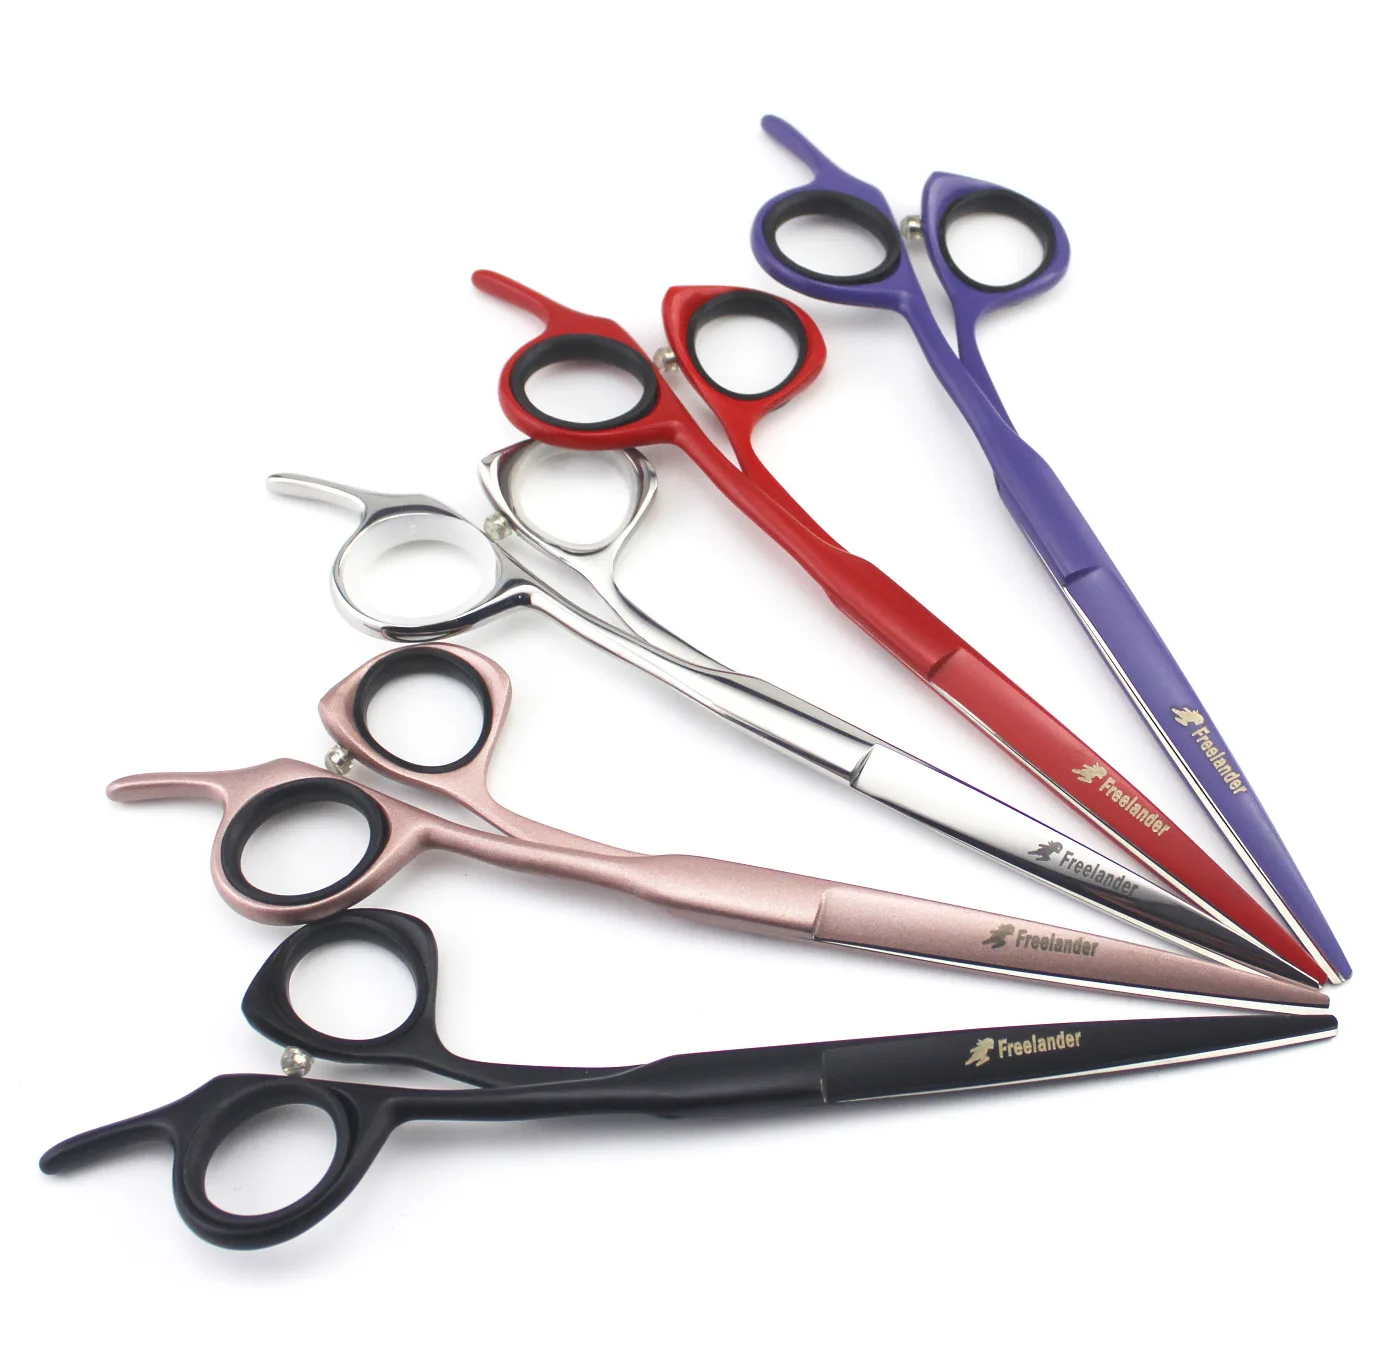 

7 inches Beauty Salon Cutting Tool blind hole hair scissors Hairdressing haircut cut Styling Professional Hairdressing Scissor